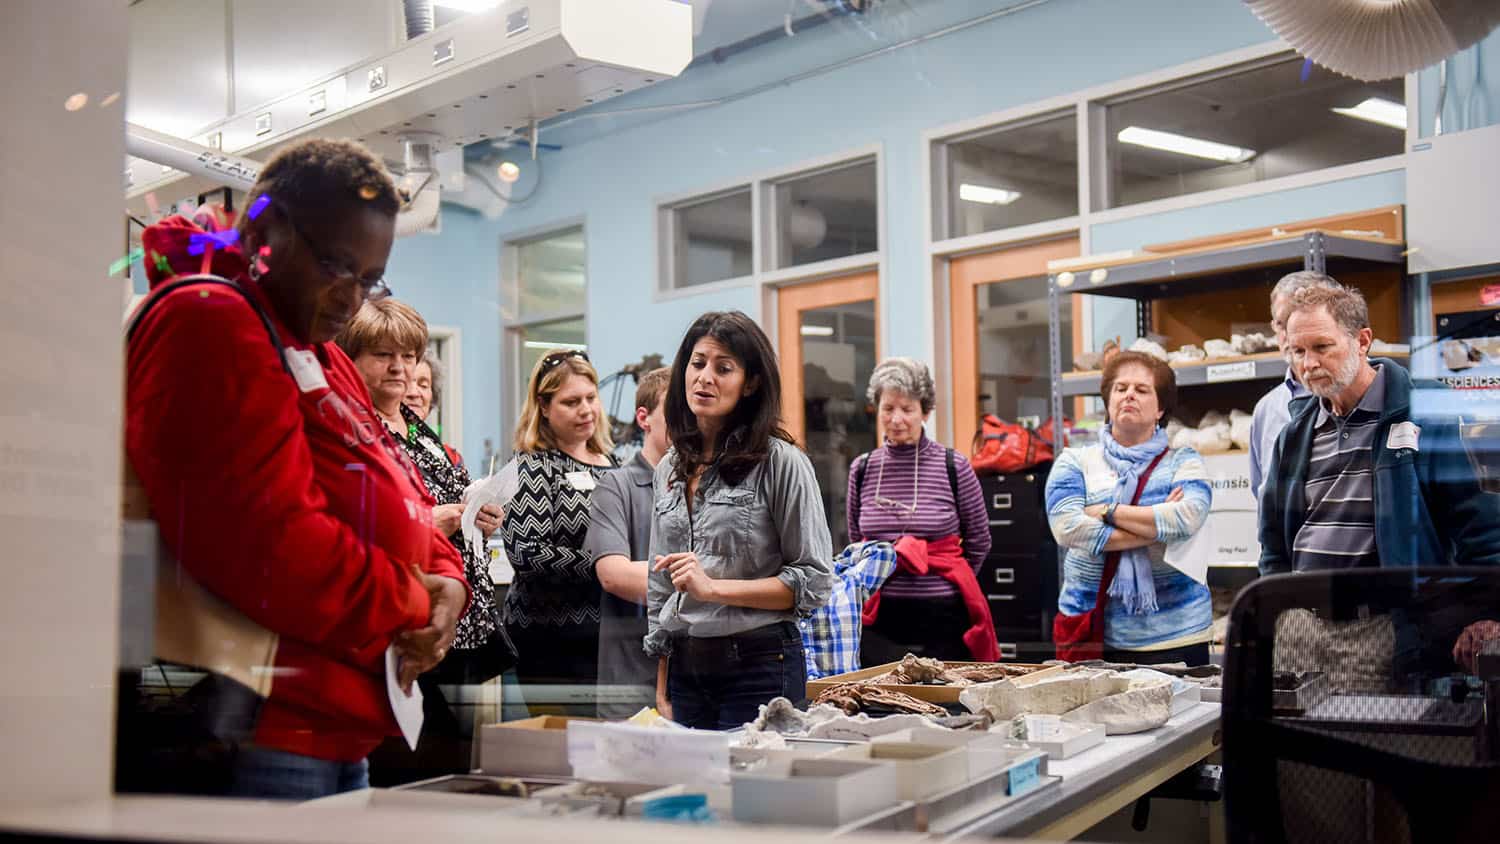 Lindsay Zanno leads a tour of her paleontology lab at the North Carolina Museum of Natural Sciences